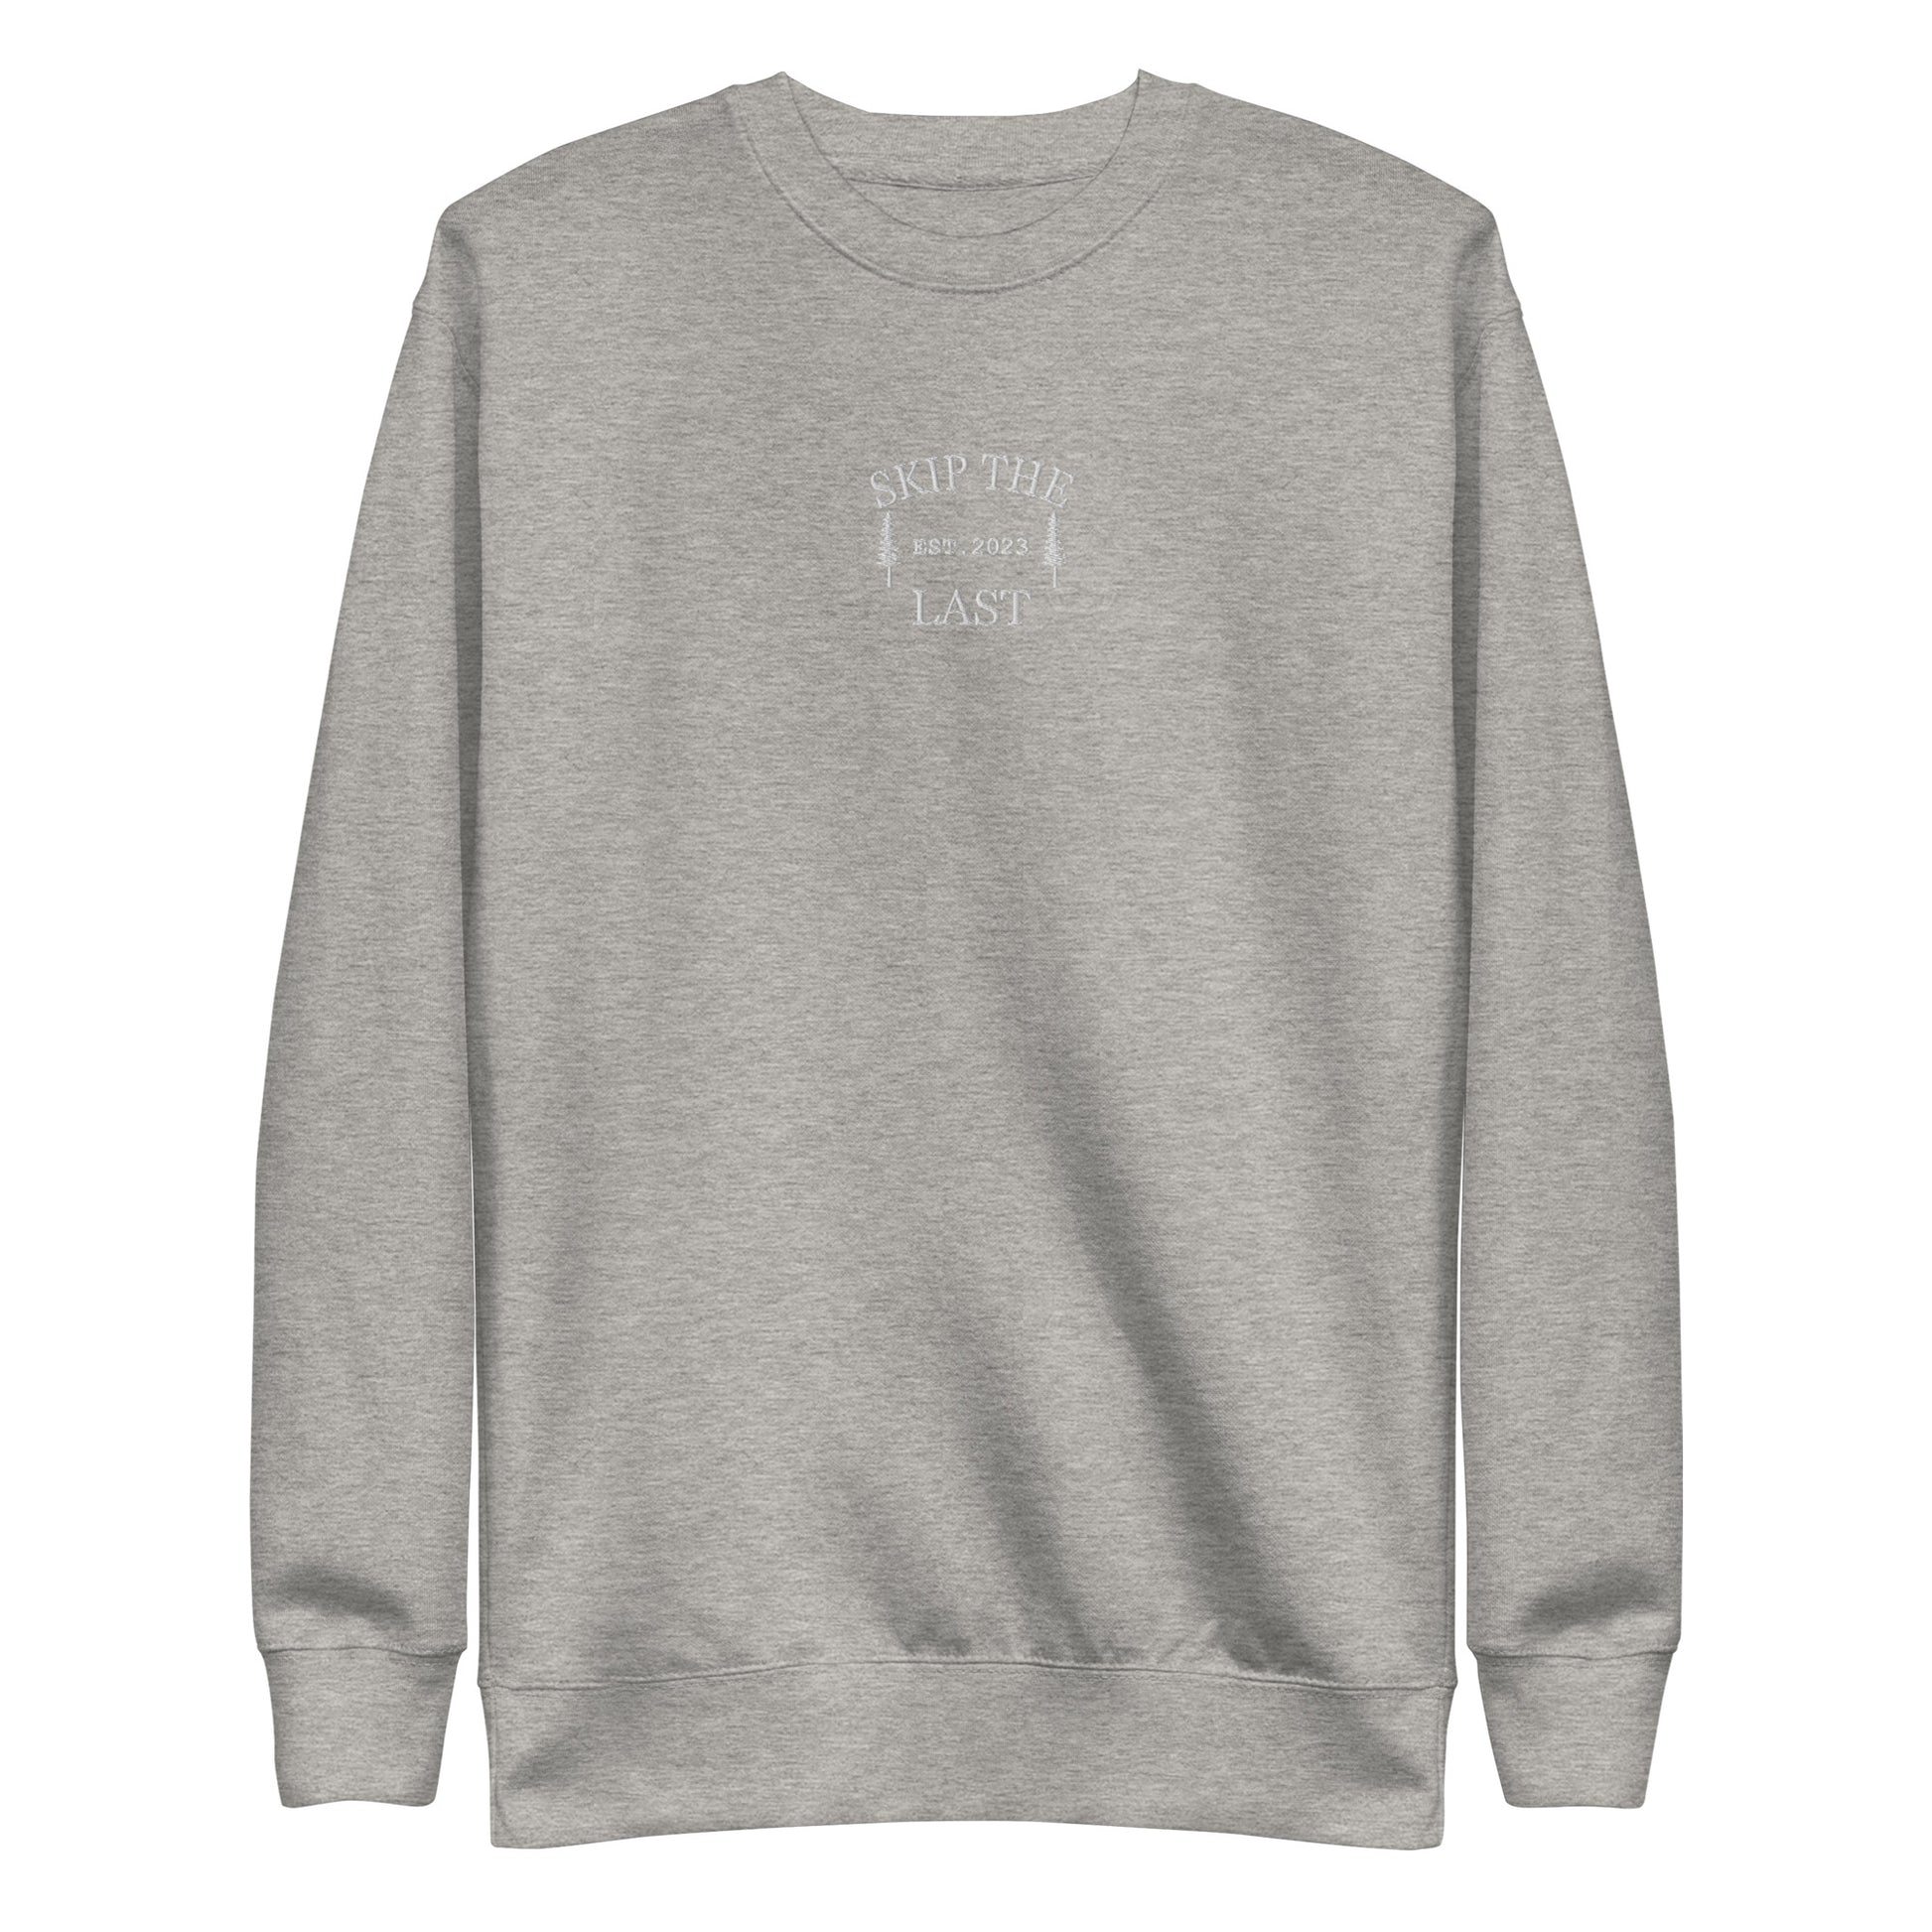 Two More Skip The Last "Skip The Last Pine Tree" carbon grey unisex embroidered crewneck. Front view